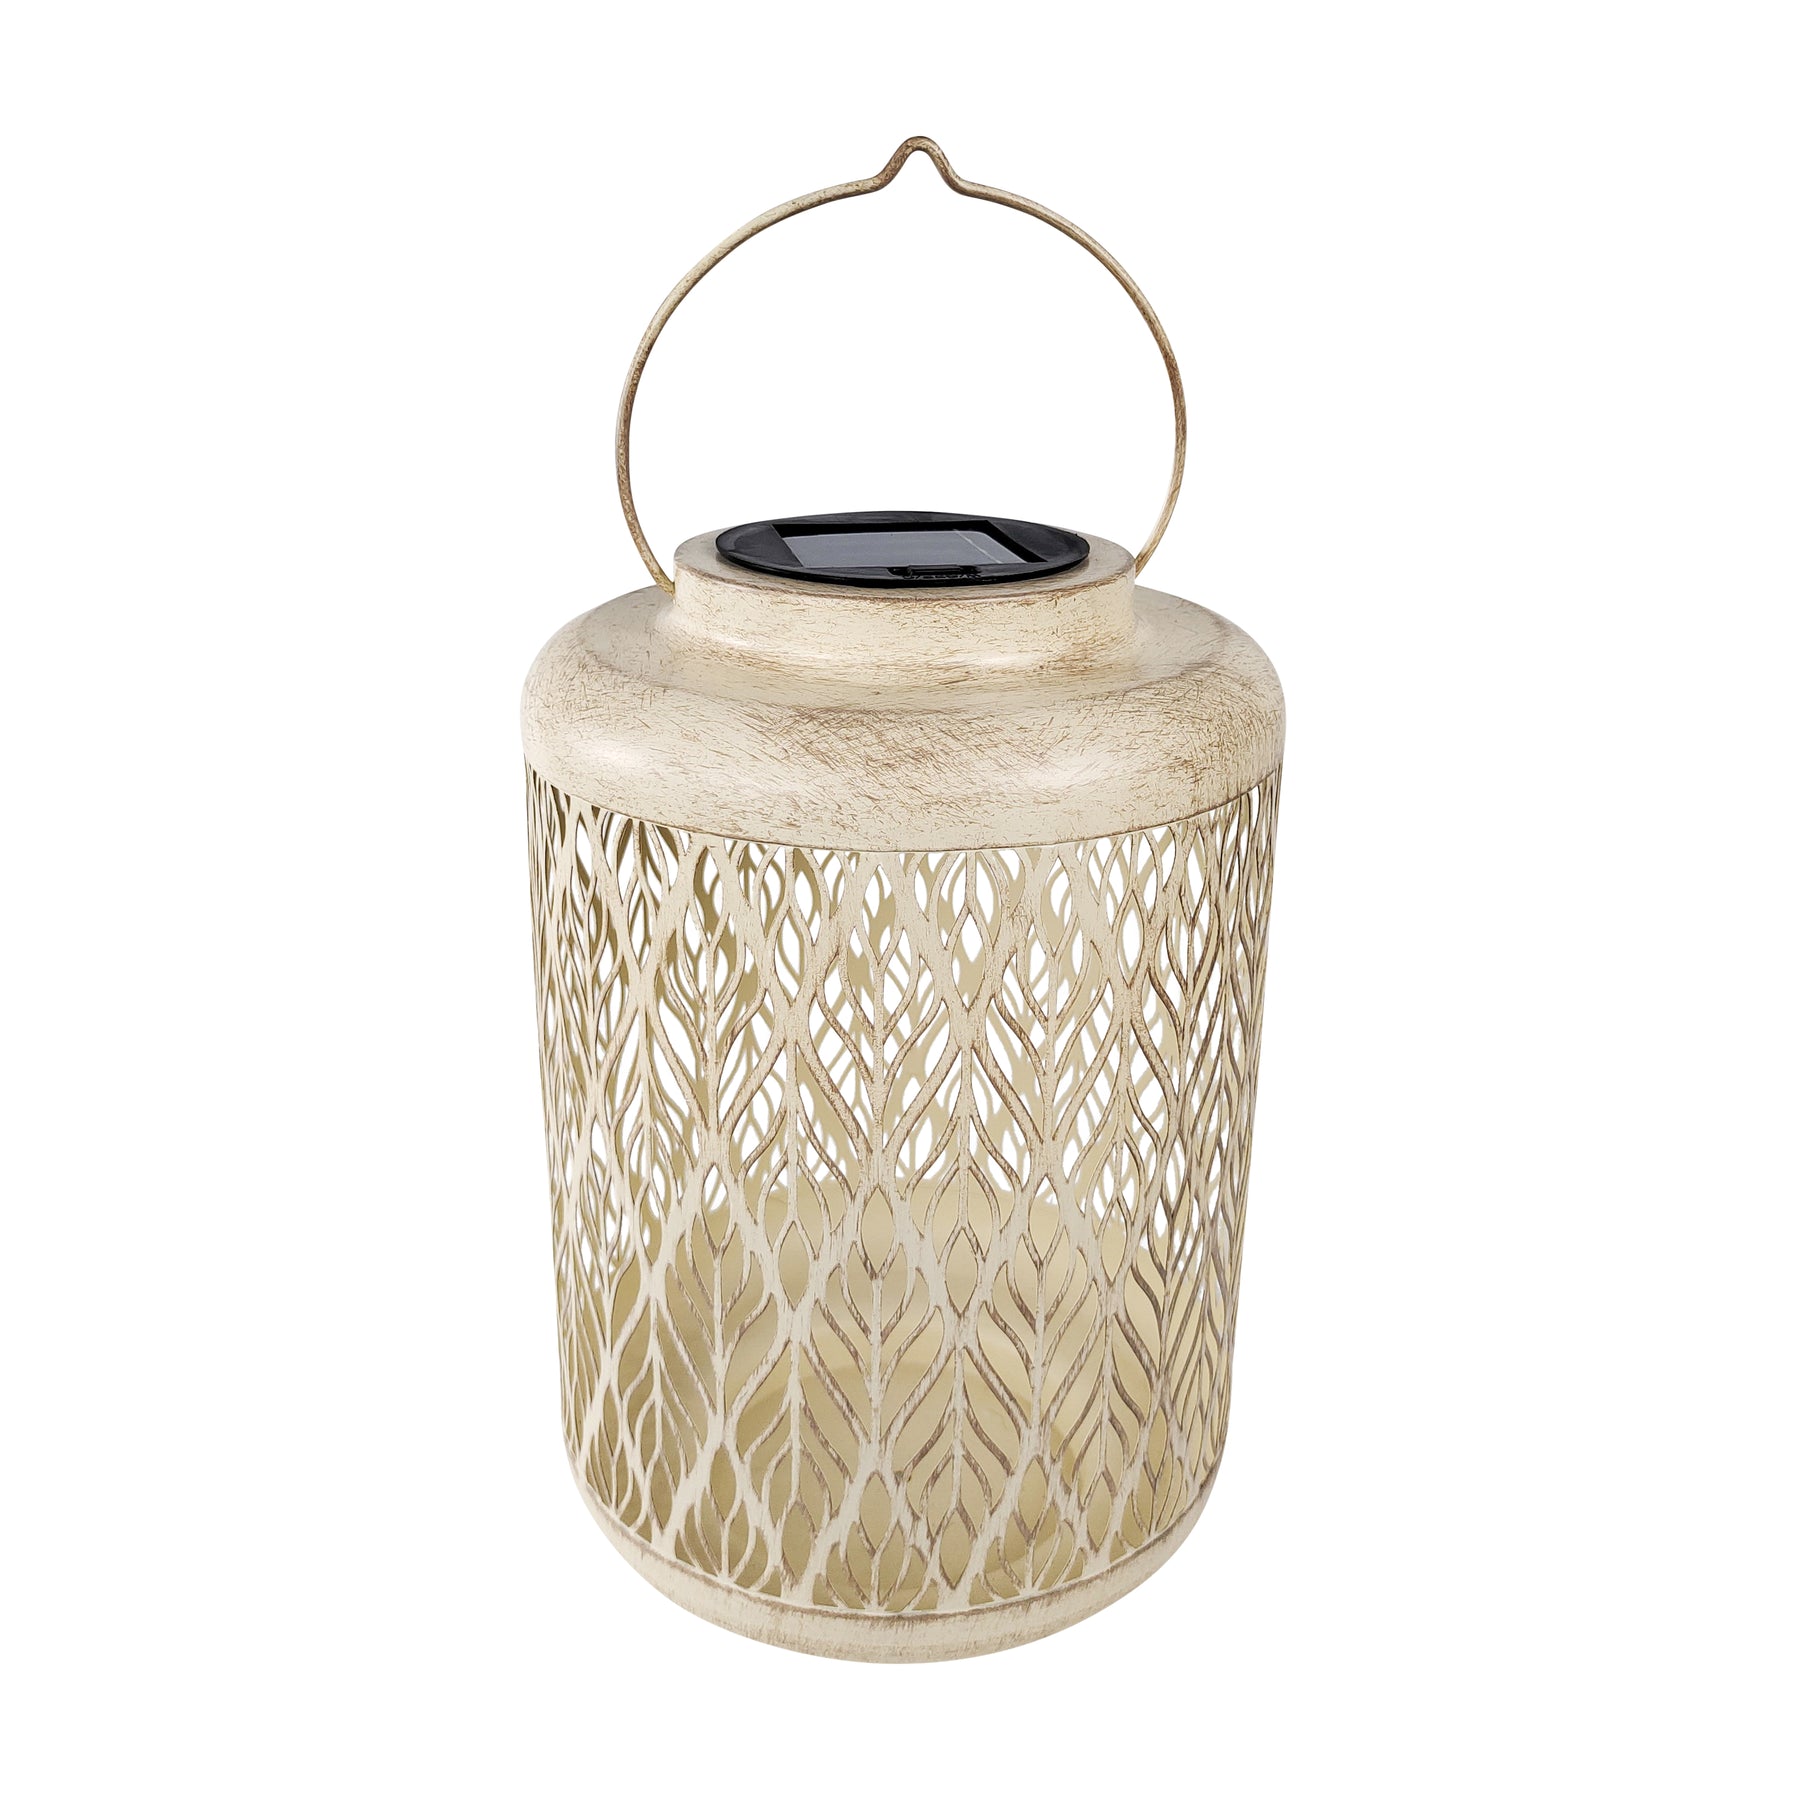 Bliss Outdoors 12-inch Tall Hanging and Tabletop Decorative Solar LED Lantern with Unique Diamond Leaf Design and Antique Hand Painted Finish in the antique white variation.